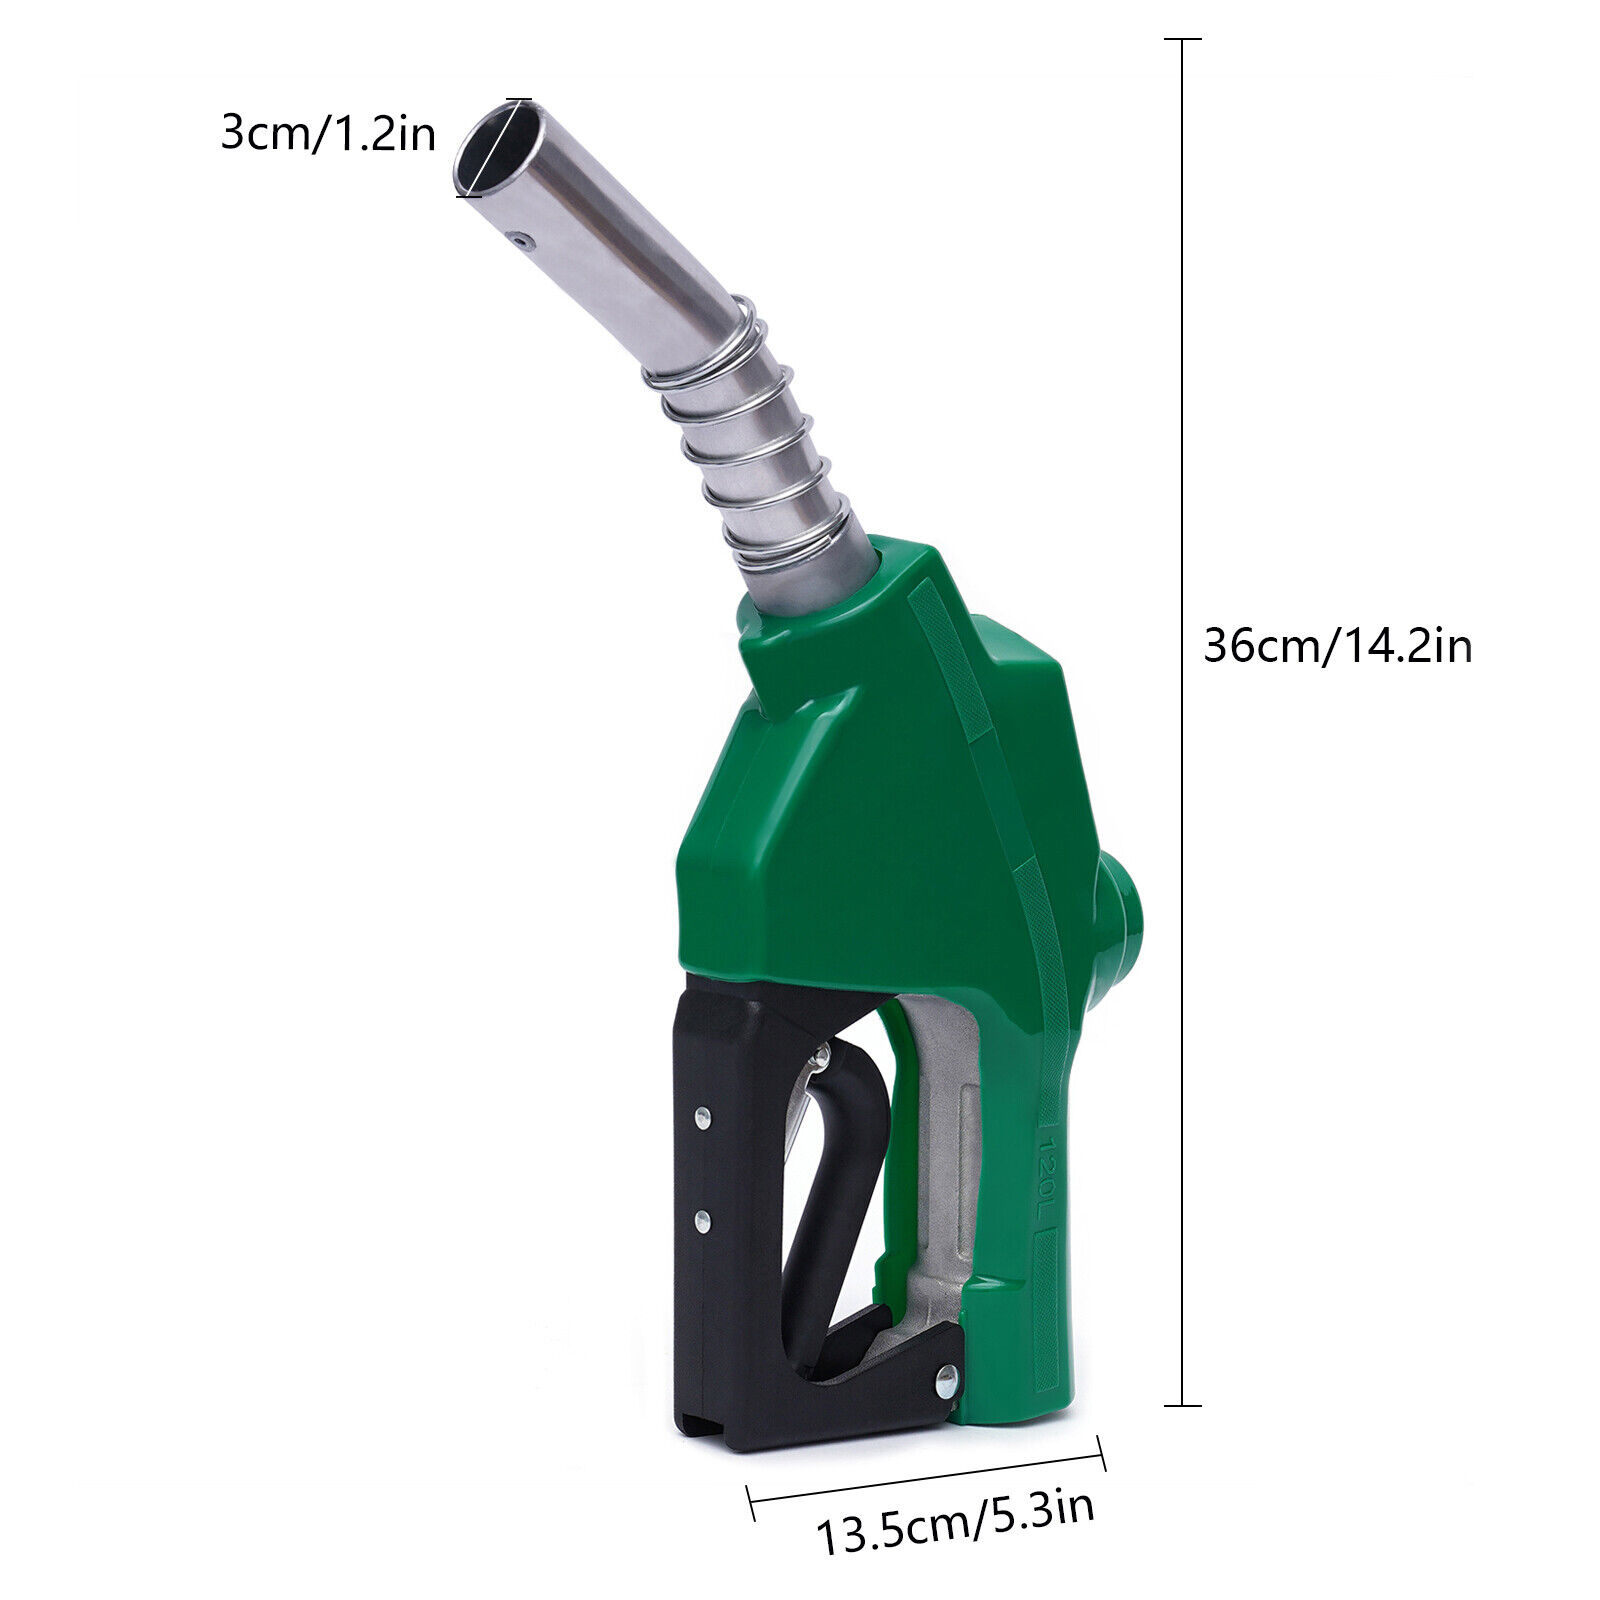 1 Inch Automatic Fuel Oil Pump Transfer Nozzle 7H Green Gas Refueling Tool - image 3 of 12